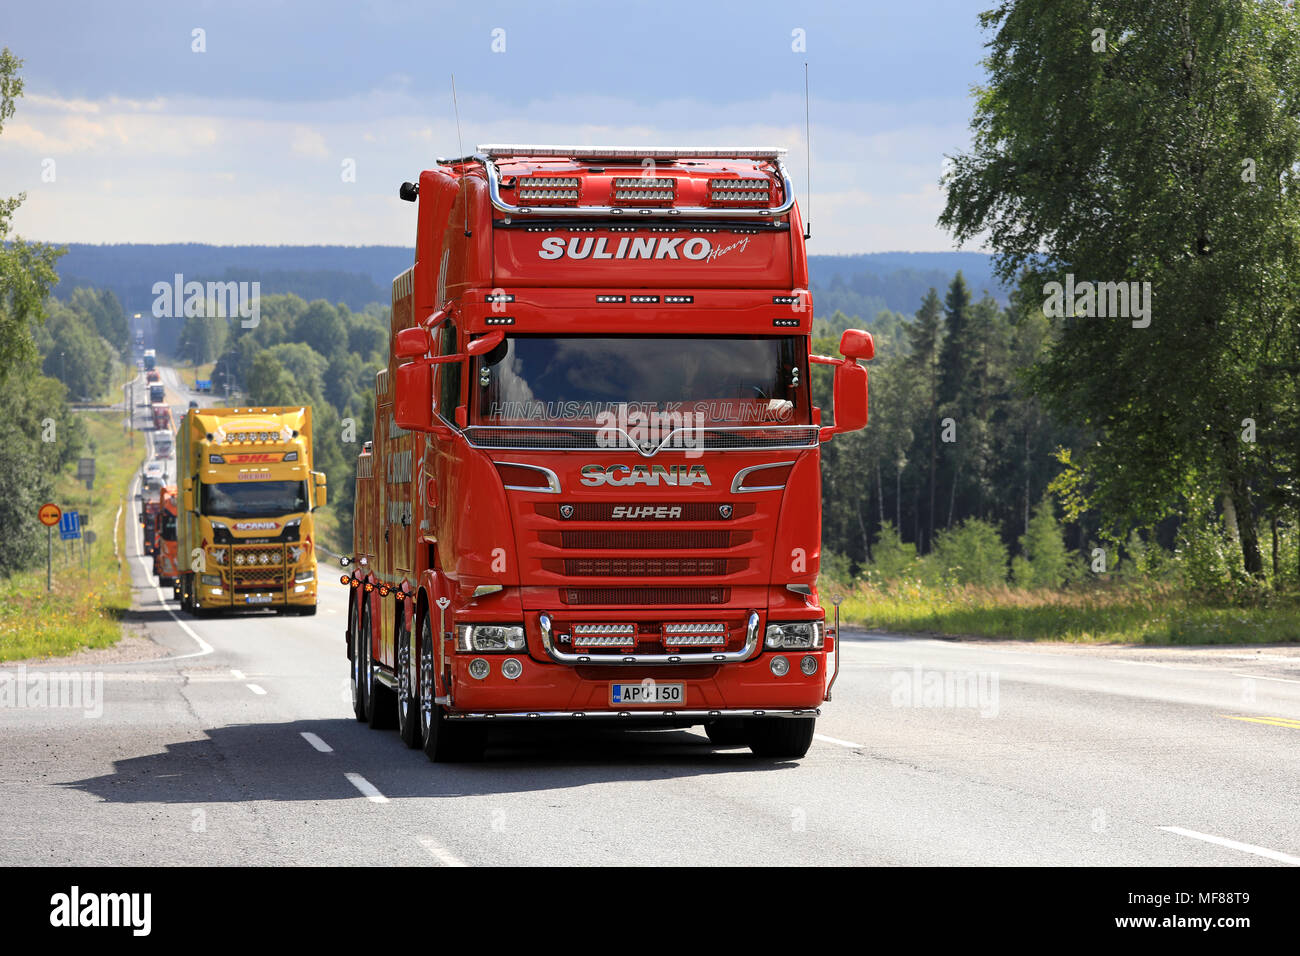 Scania R620 heavy duty tow truck of K. Sulinko leads truck convoy to Power Truck Show along scenic highway in summer in Ikaalinen, Finland - August 10 Stock Photo